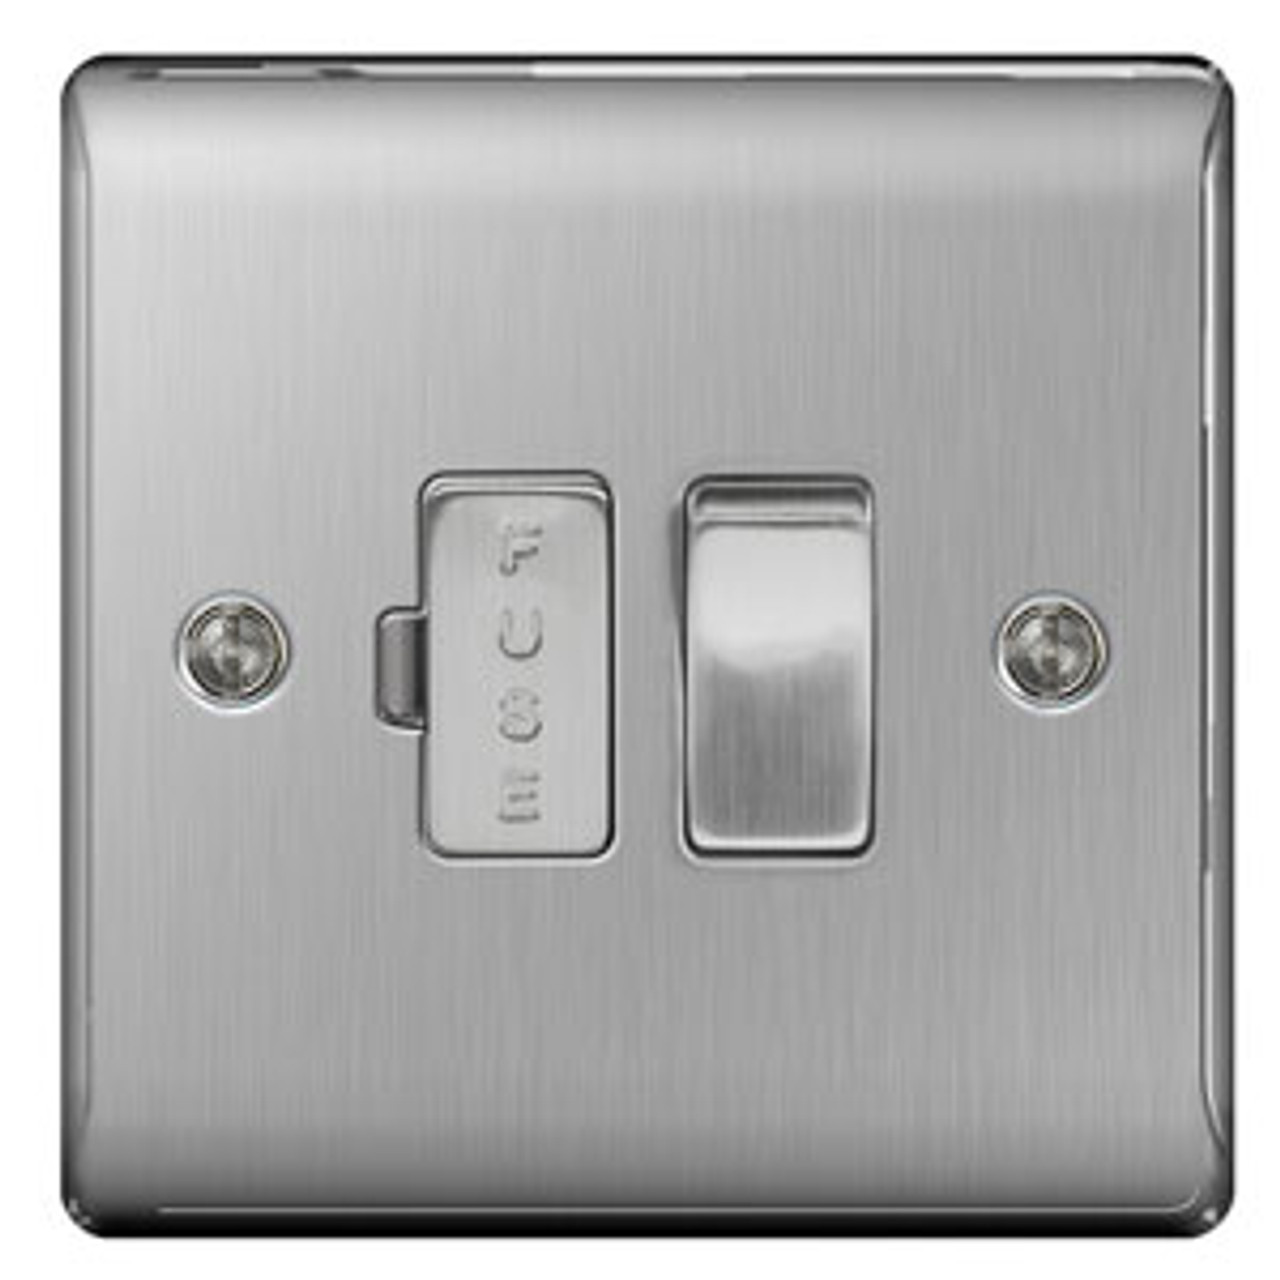 BG Brushed Steel Fused Connection Unit Switched 13A